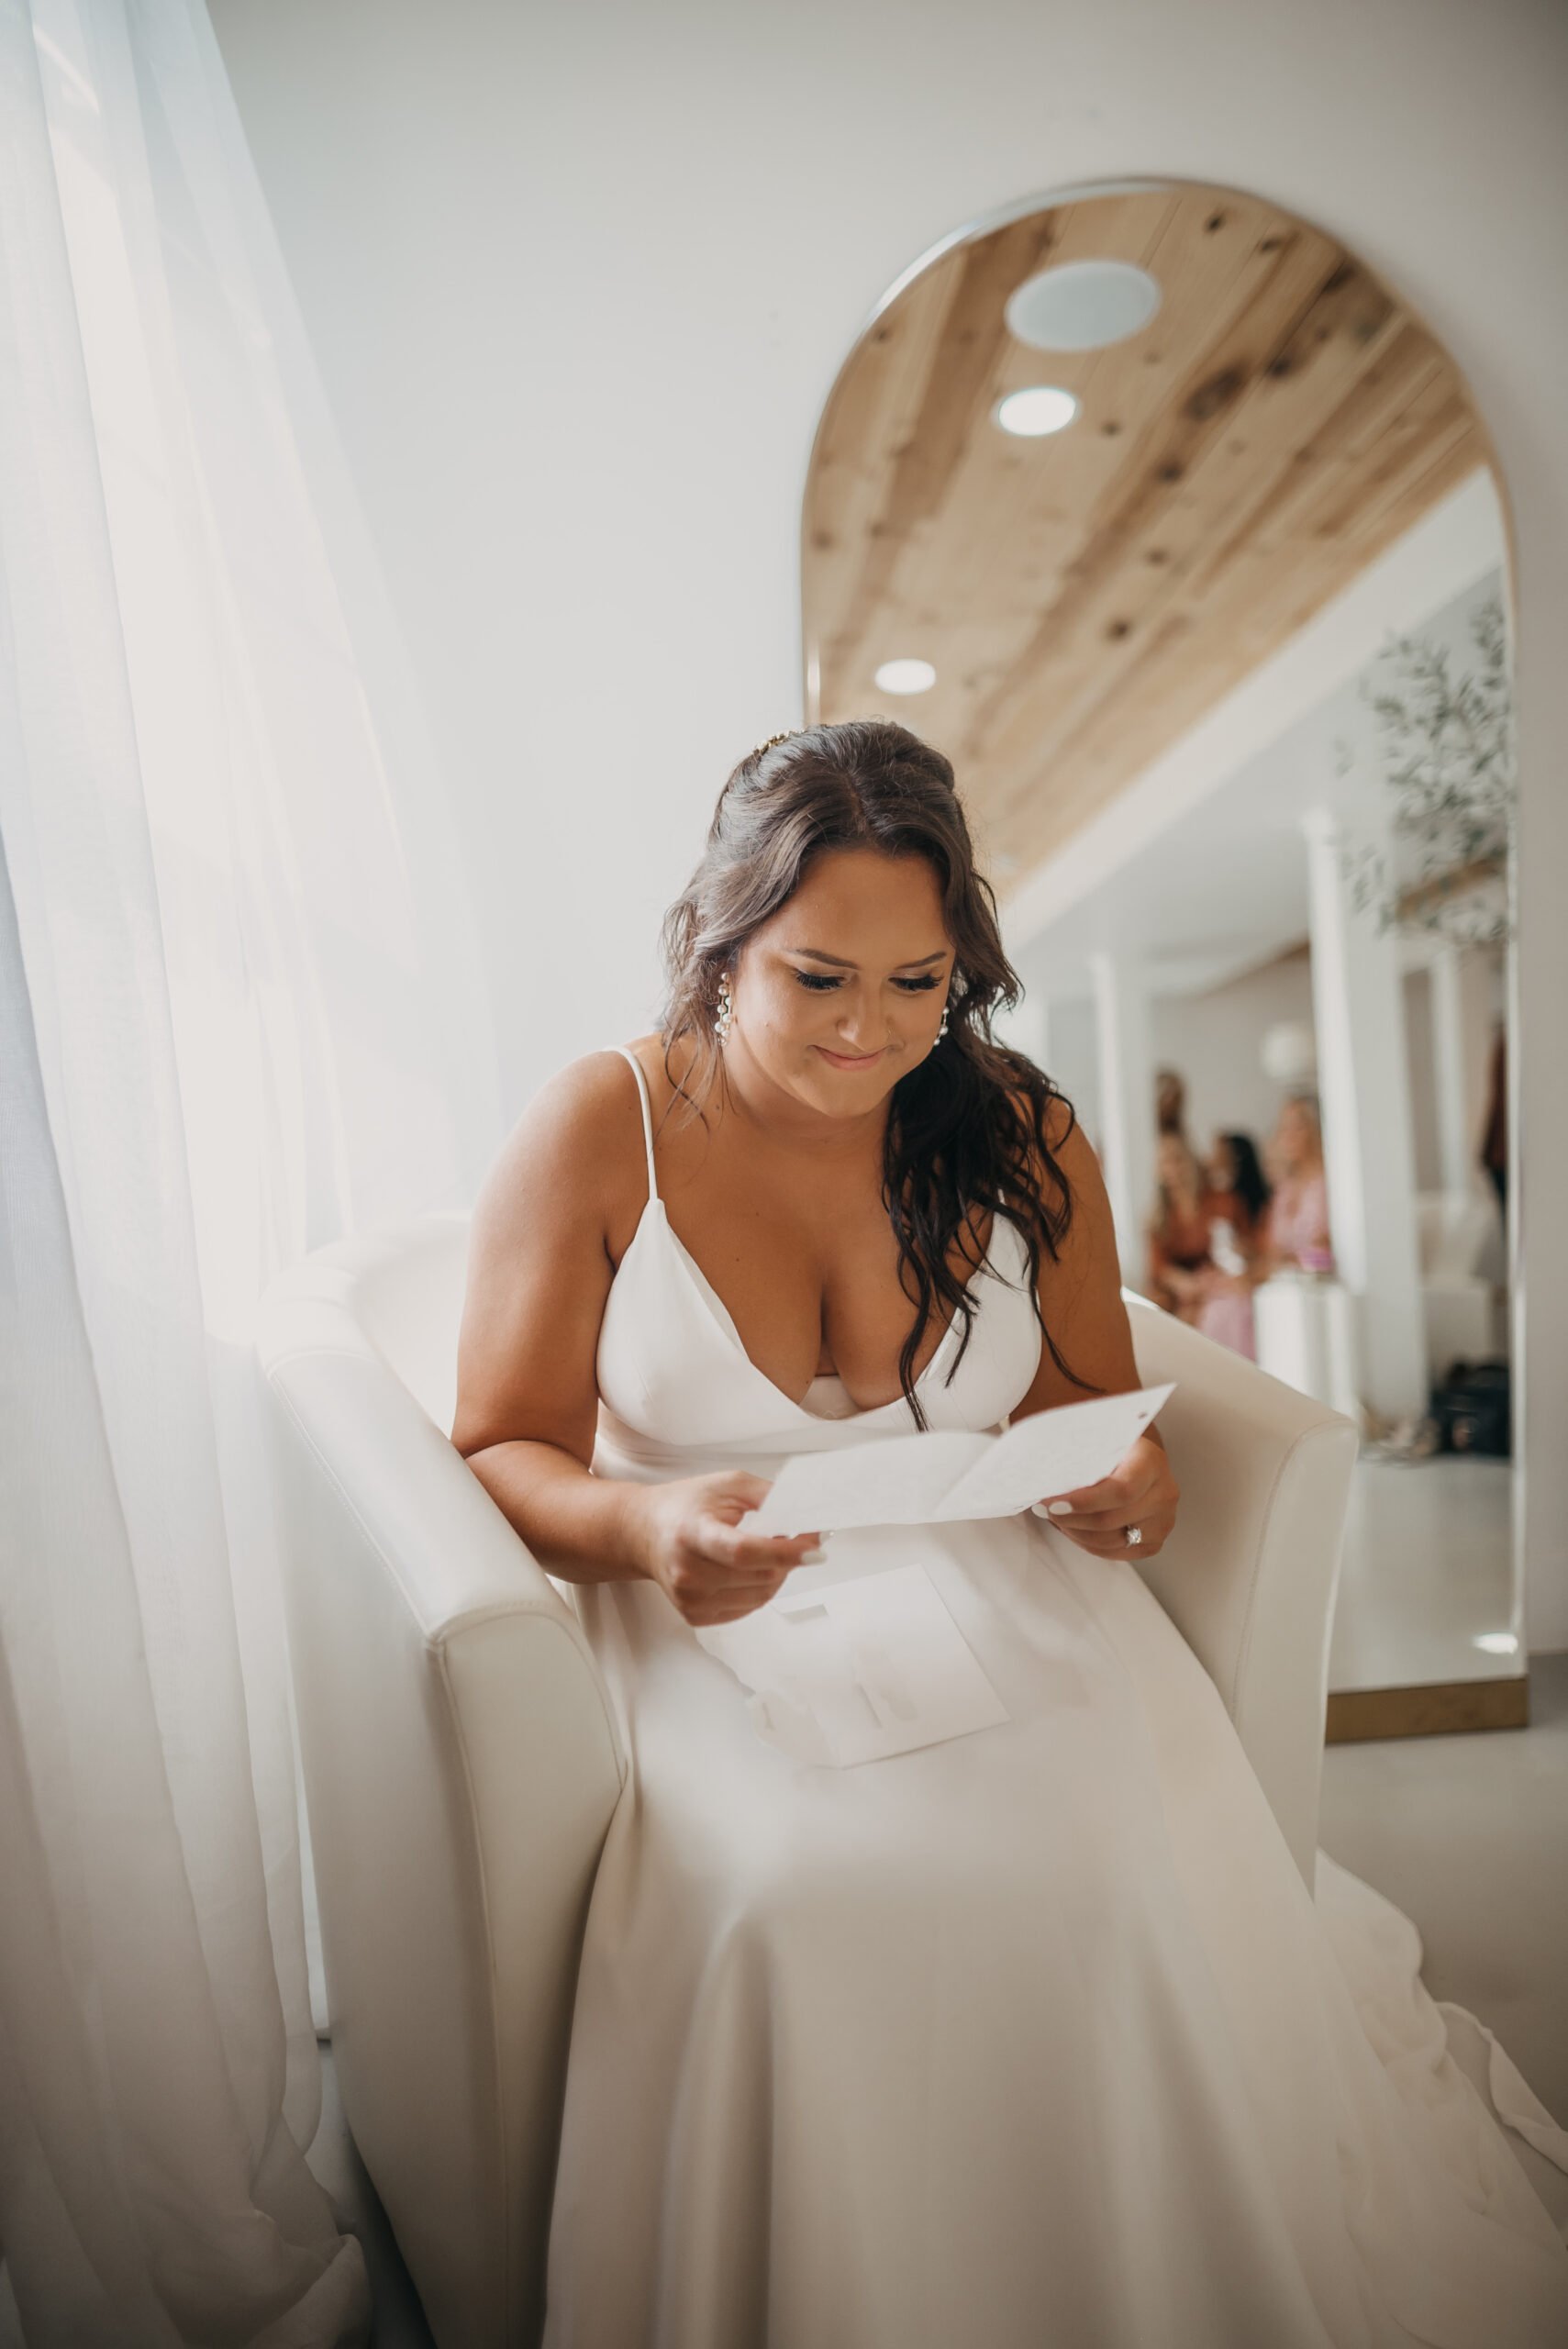 Intimate Letter Reading, Vows, Minnesota Wedding Photographer, Minnesota Photographer, Minnesota Wedding, Ivory North Co., Ivory North Co. Wedding, Mora Minnesota Wedding, Wedding Inspiration, Wedding Ideas, Wedding Photos, Wedding Photography, Outdoor Wedding, Fall Wedding,  Unique Wedding Photos, Fun Wedding Photos, Wedding Inspo